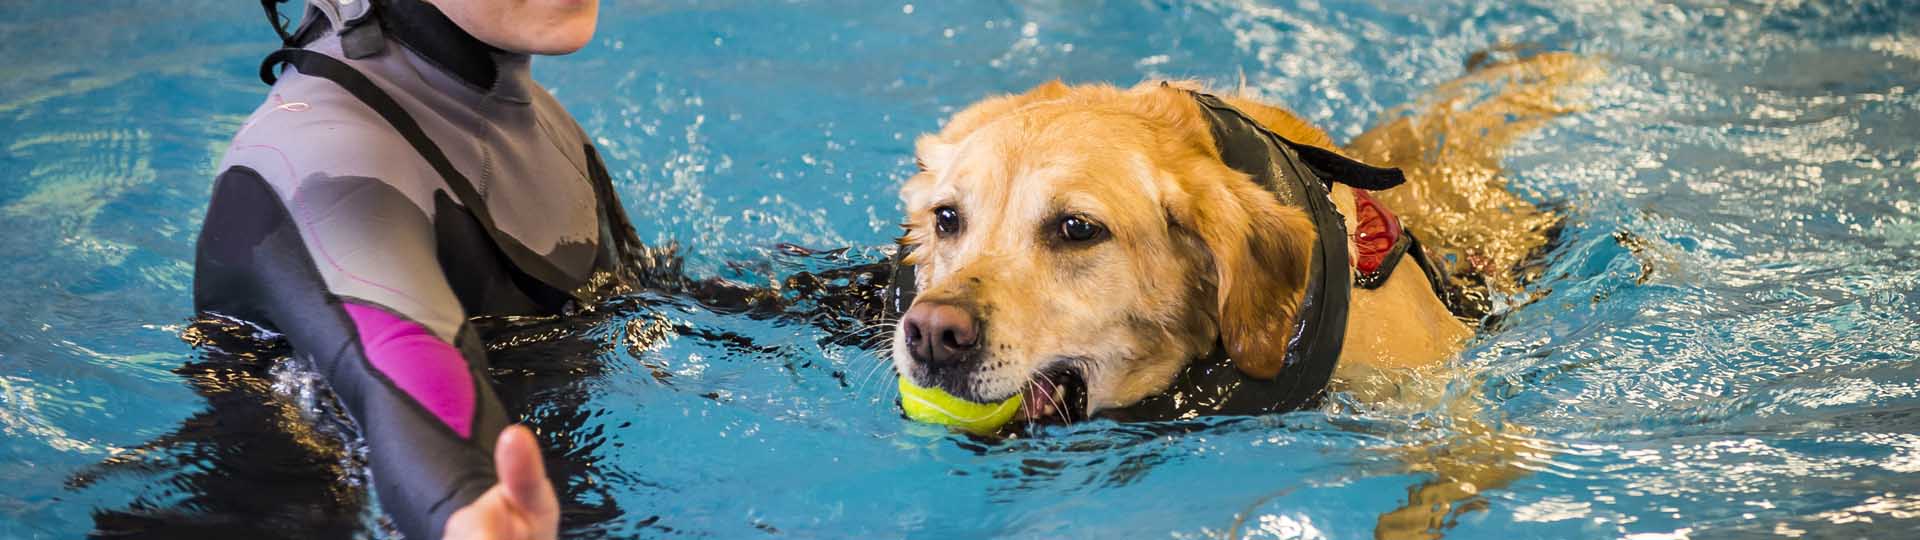 Golden Retriever having hydrotherapy in the pool